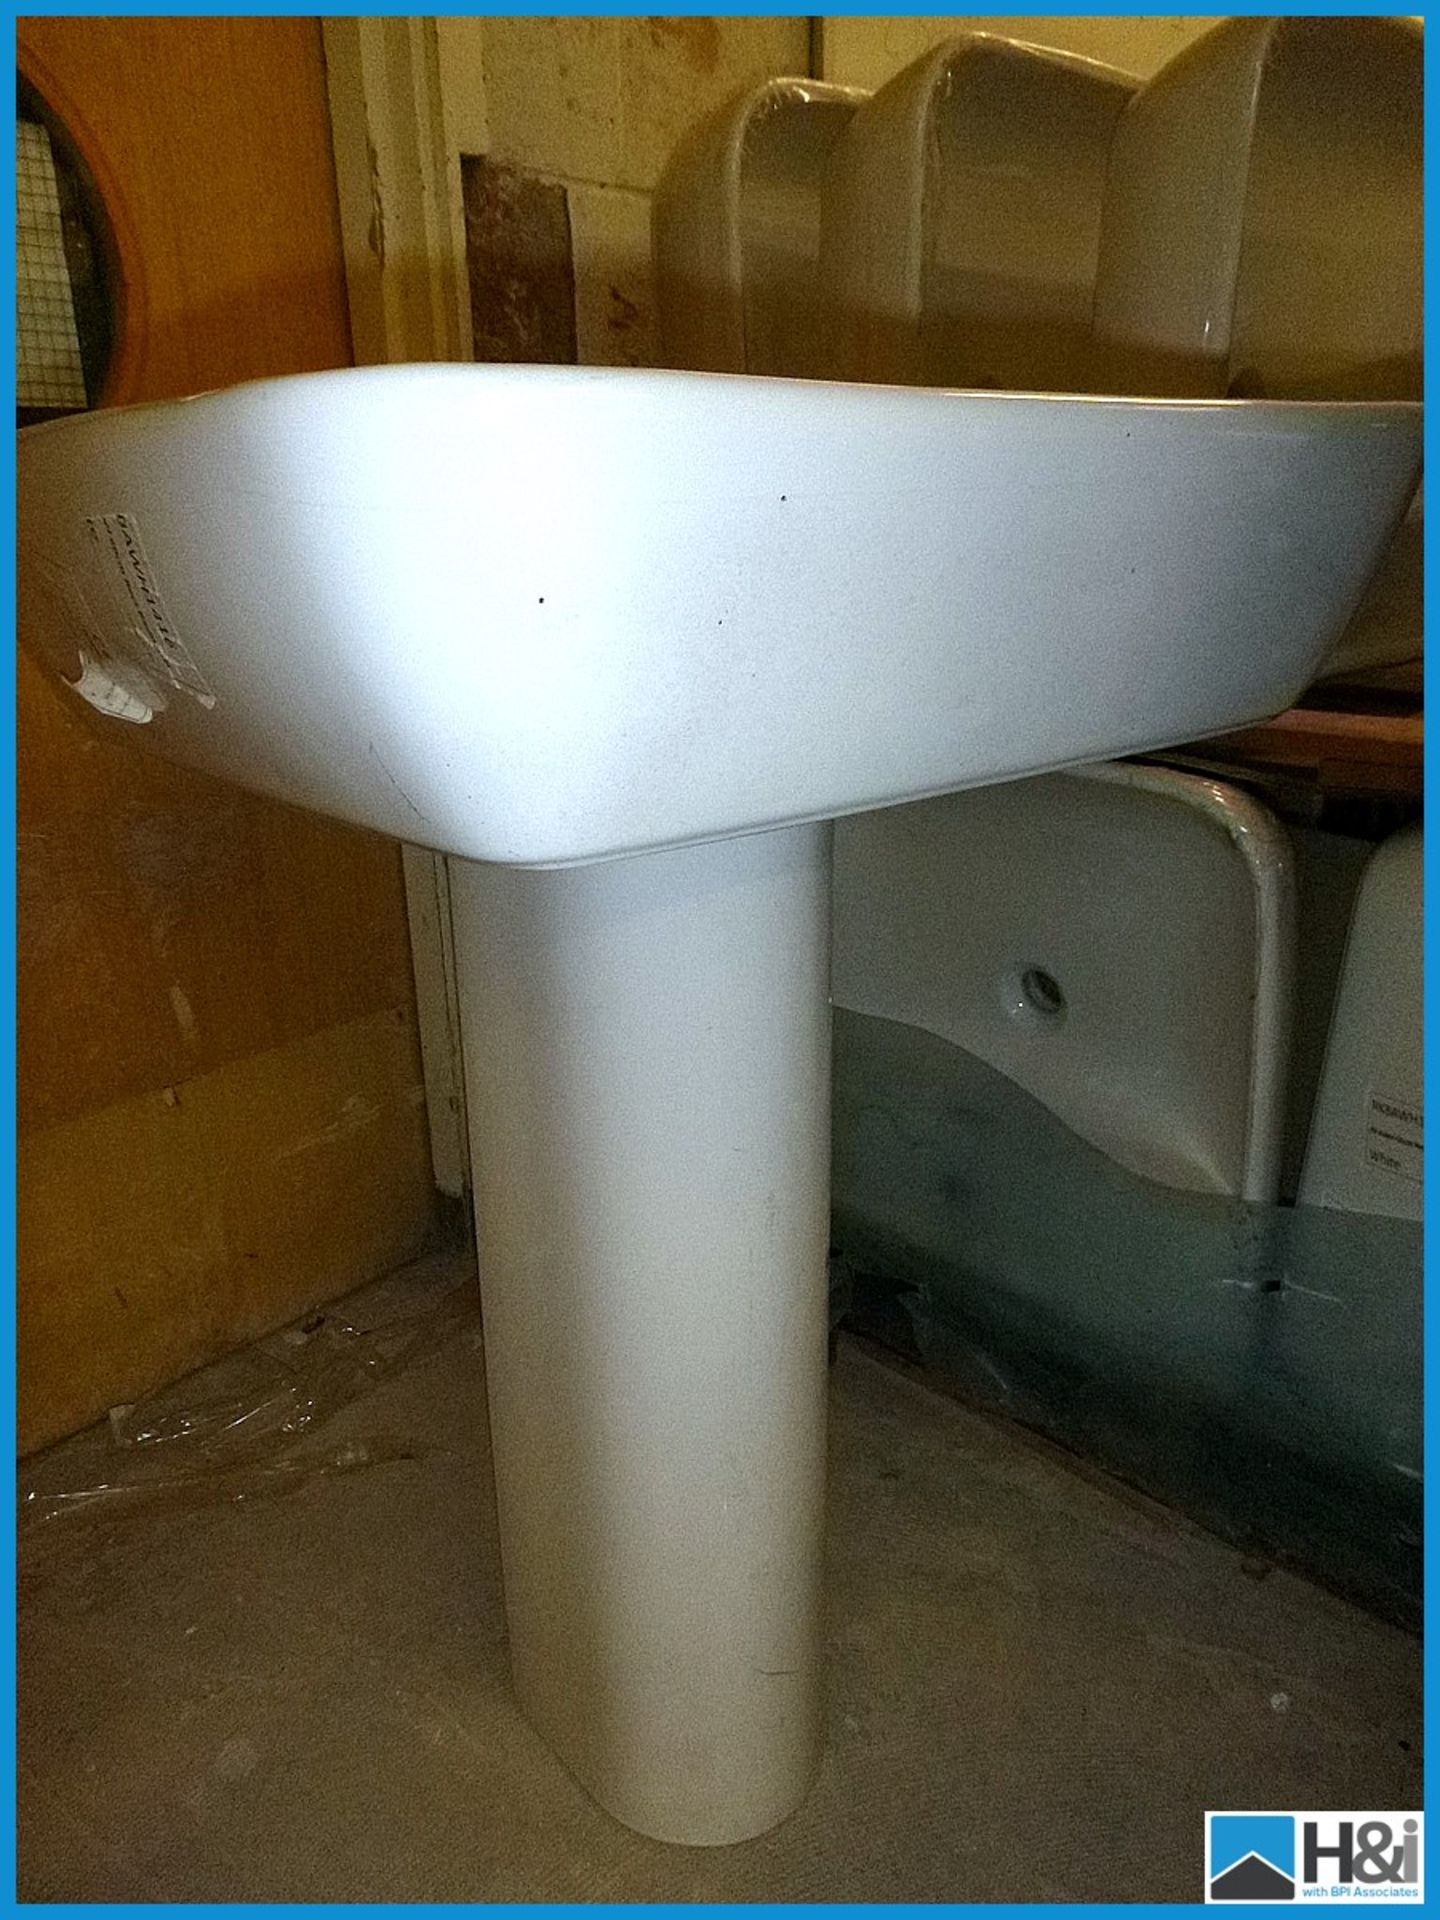 600mm x 500mm Vitra Basin & Pedestal RRP £98 Appraisal: Viewing Essential Serial No: NA Location: - Image 2 of 2